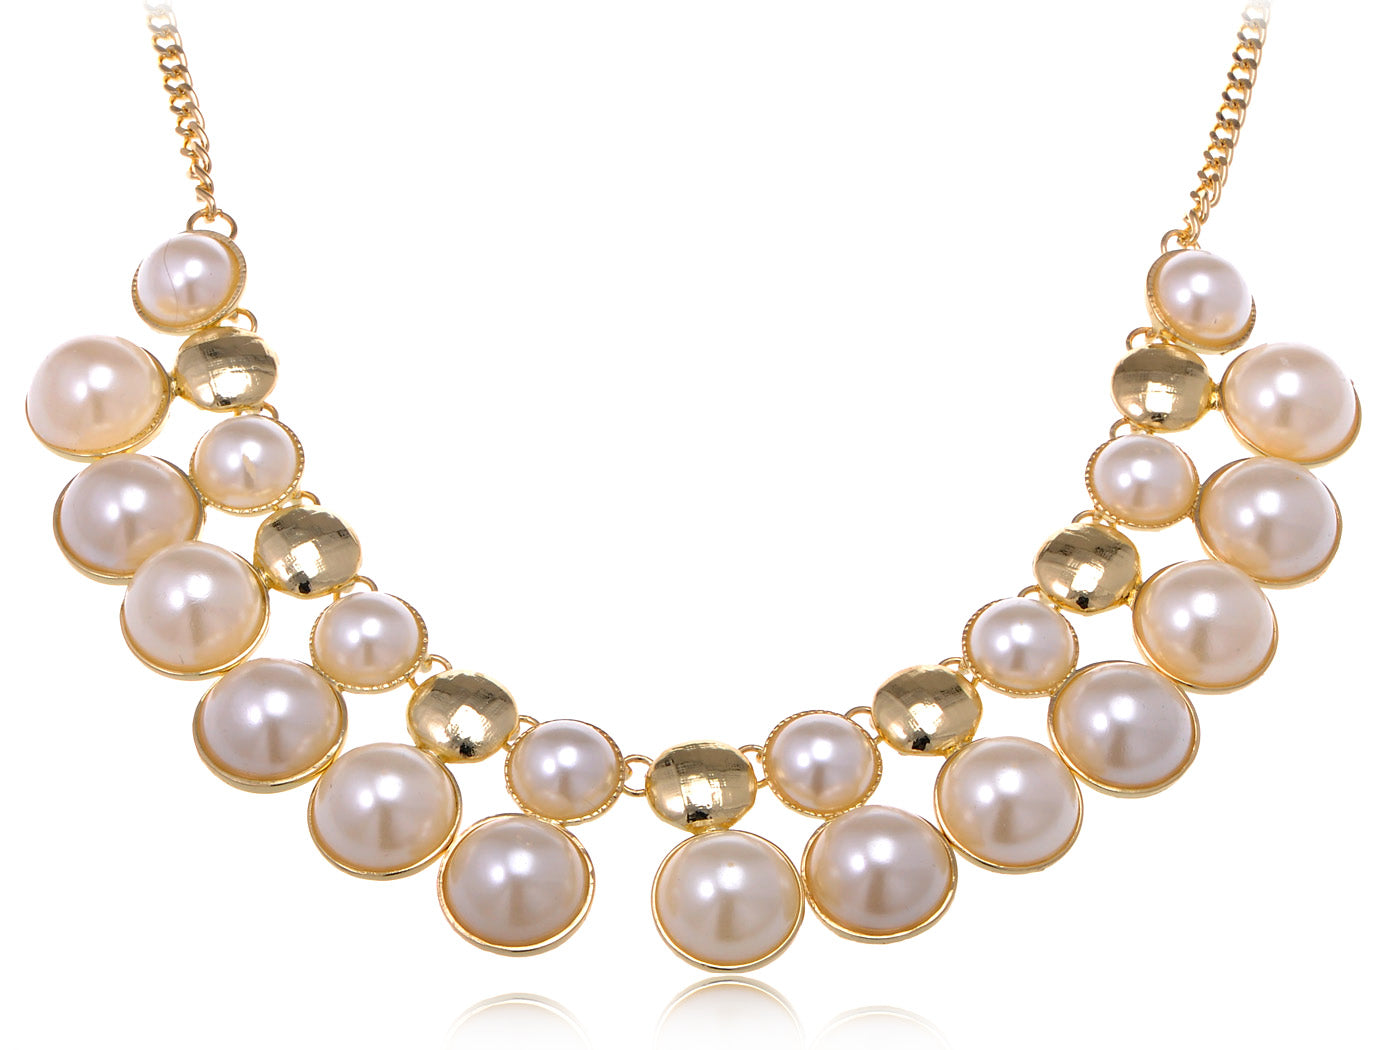 Cluster Style D Enamel And Pearl Formal Necklace